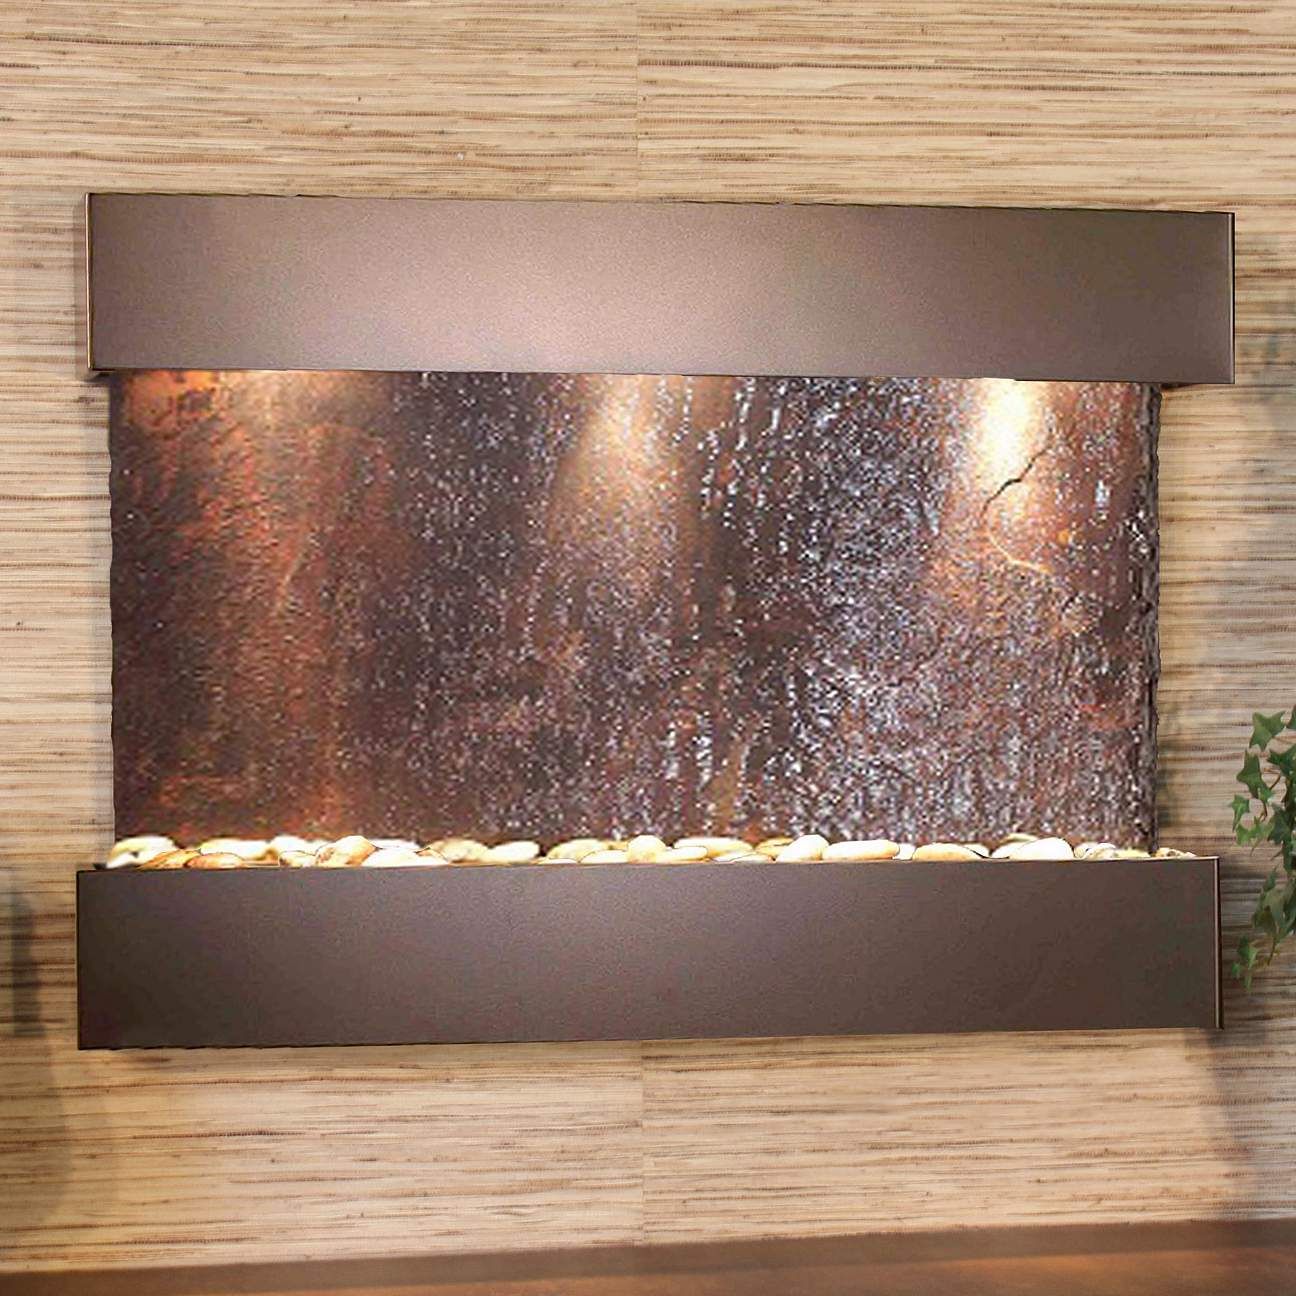 Reflection Creek 27" High Slate and Bronze Wall Fountain | Lamps Plus